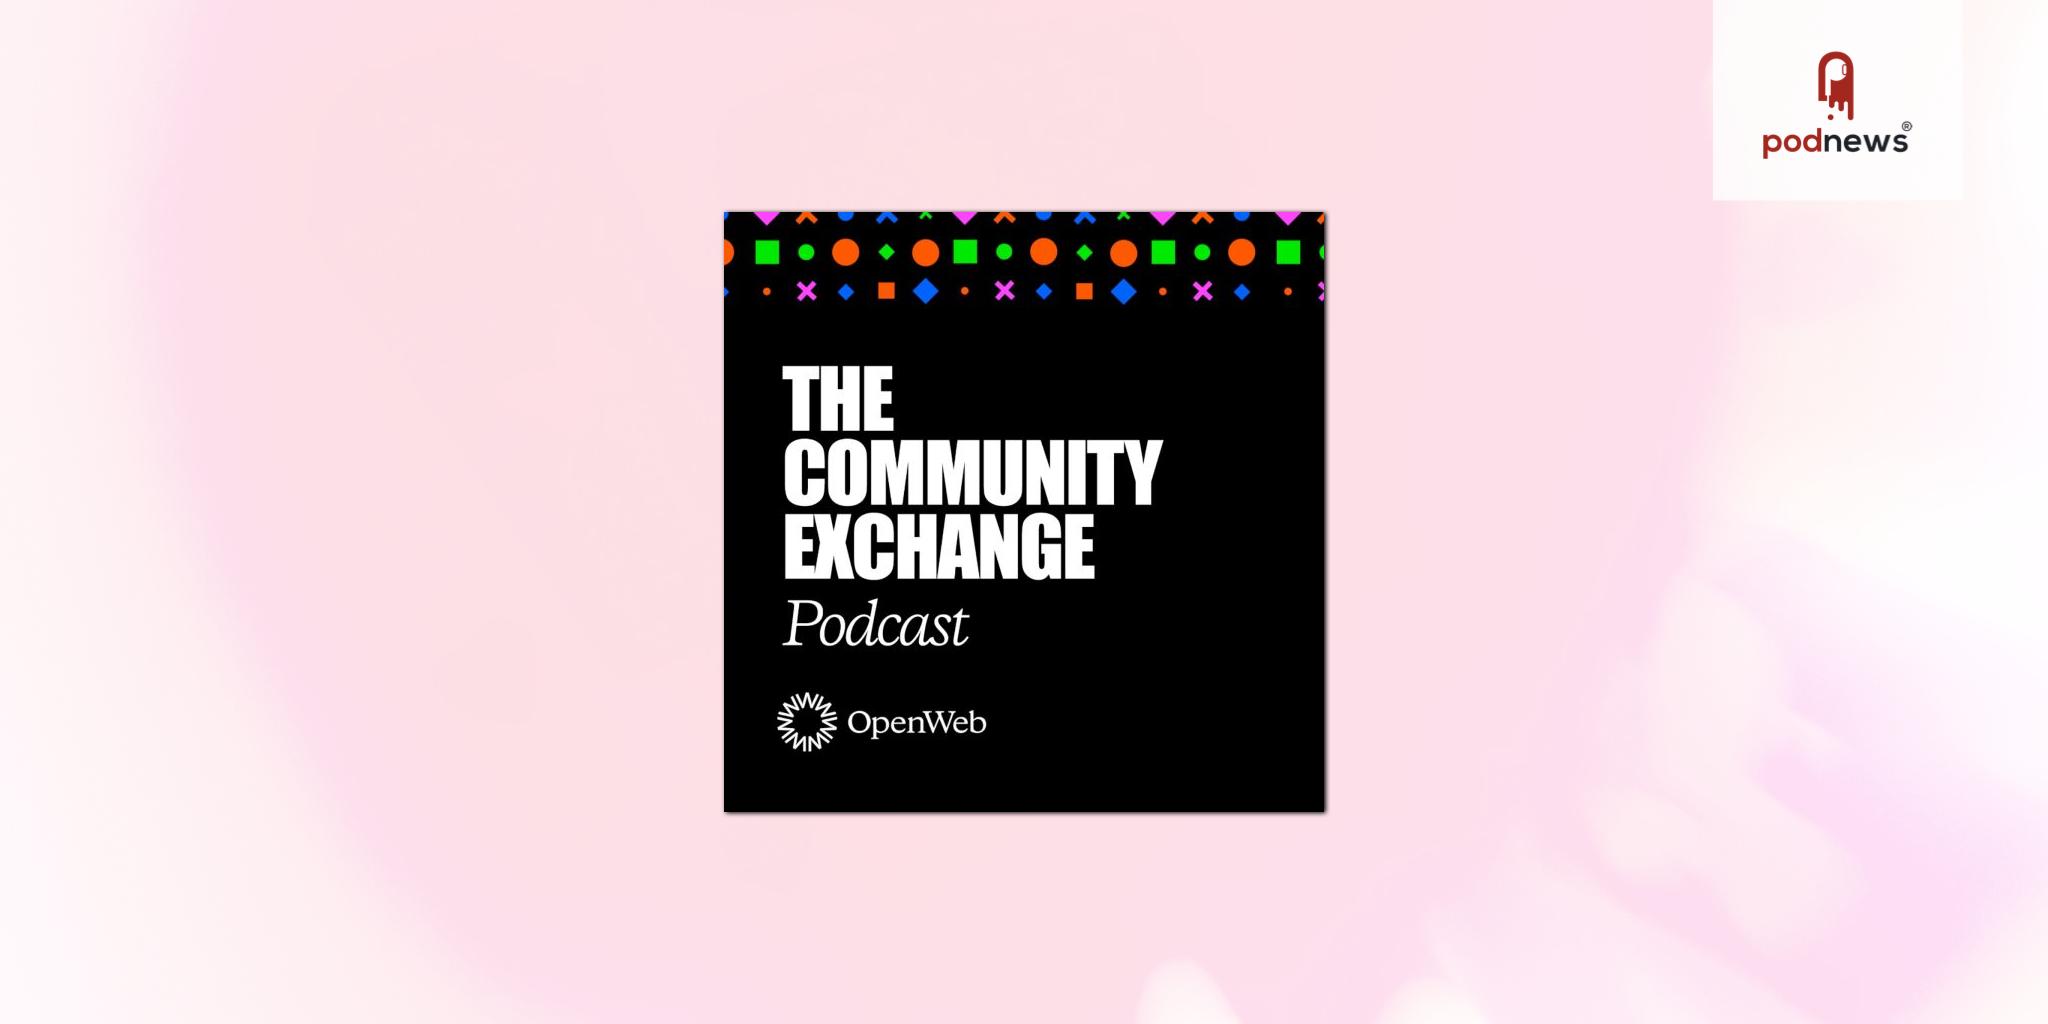 OpenWeb Launches The Community Exchange Podcast, Amplifying Leading Voices in Technology and Publishing